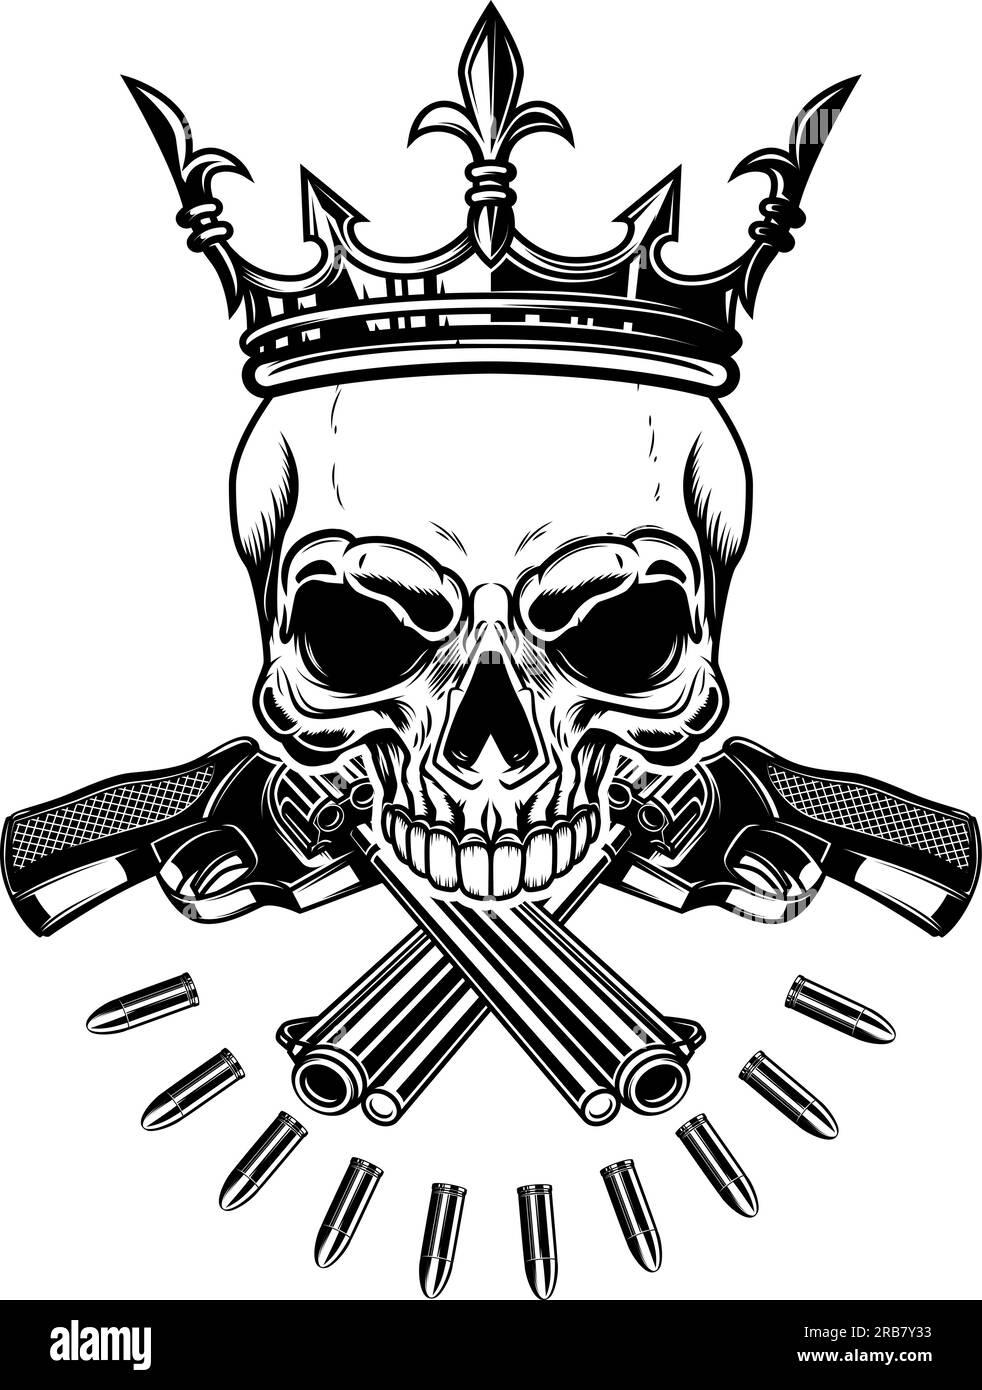 Illustration of the skull with crossed revolvers and king crown. Design element for logo, label, sign, emblem. Vector illustration, Illustration of th Stock Vector